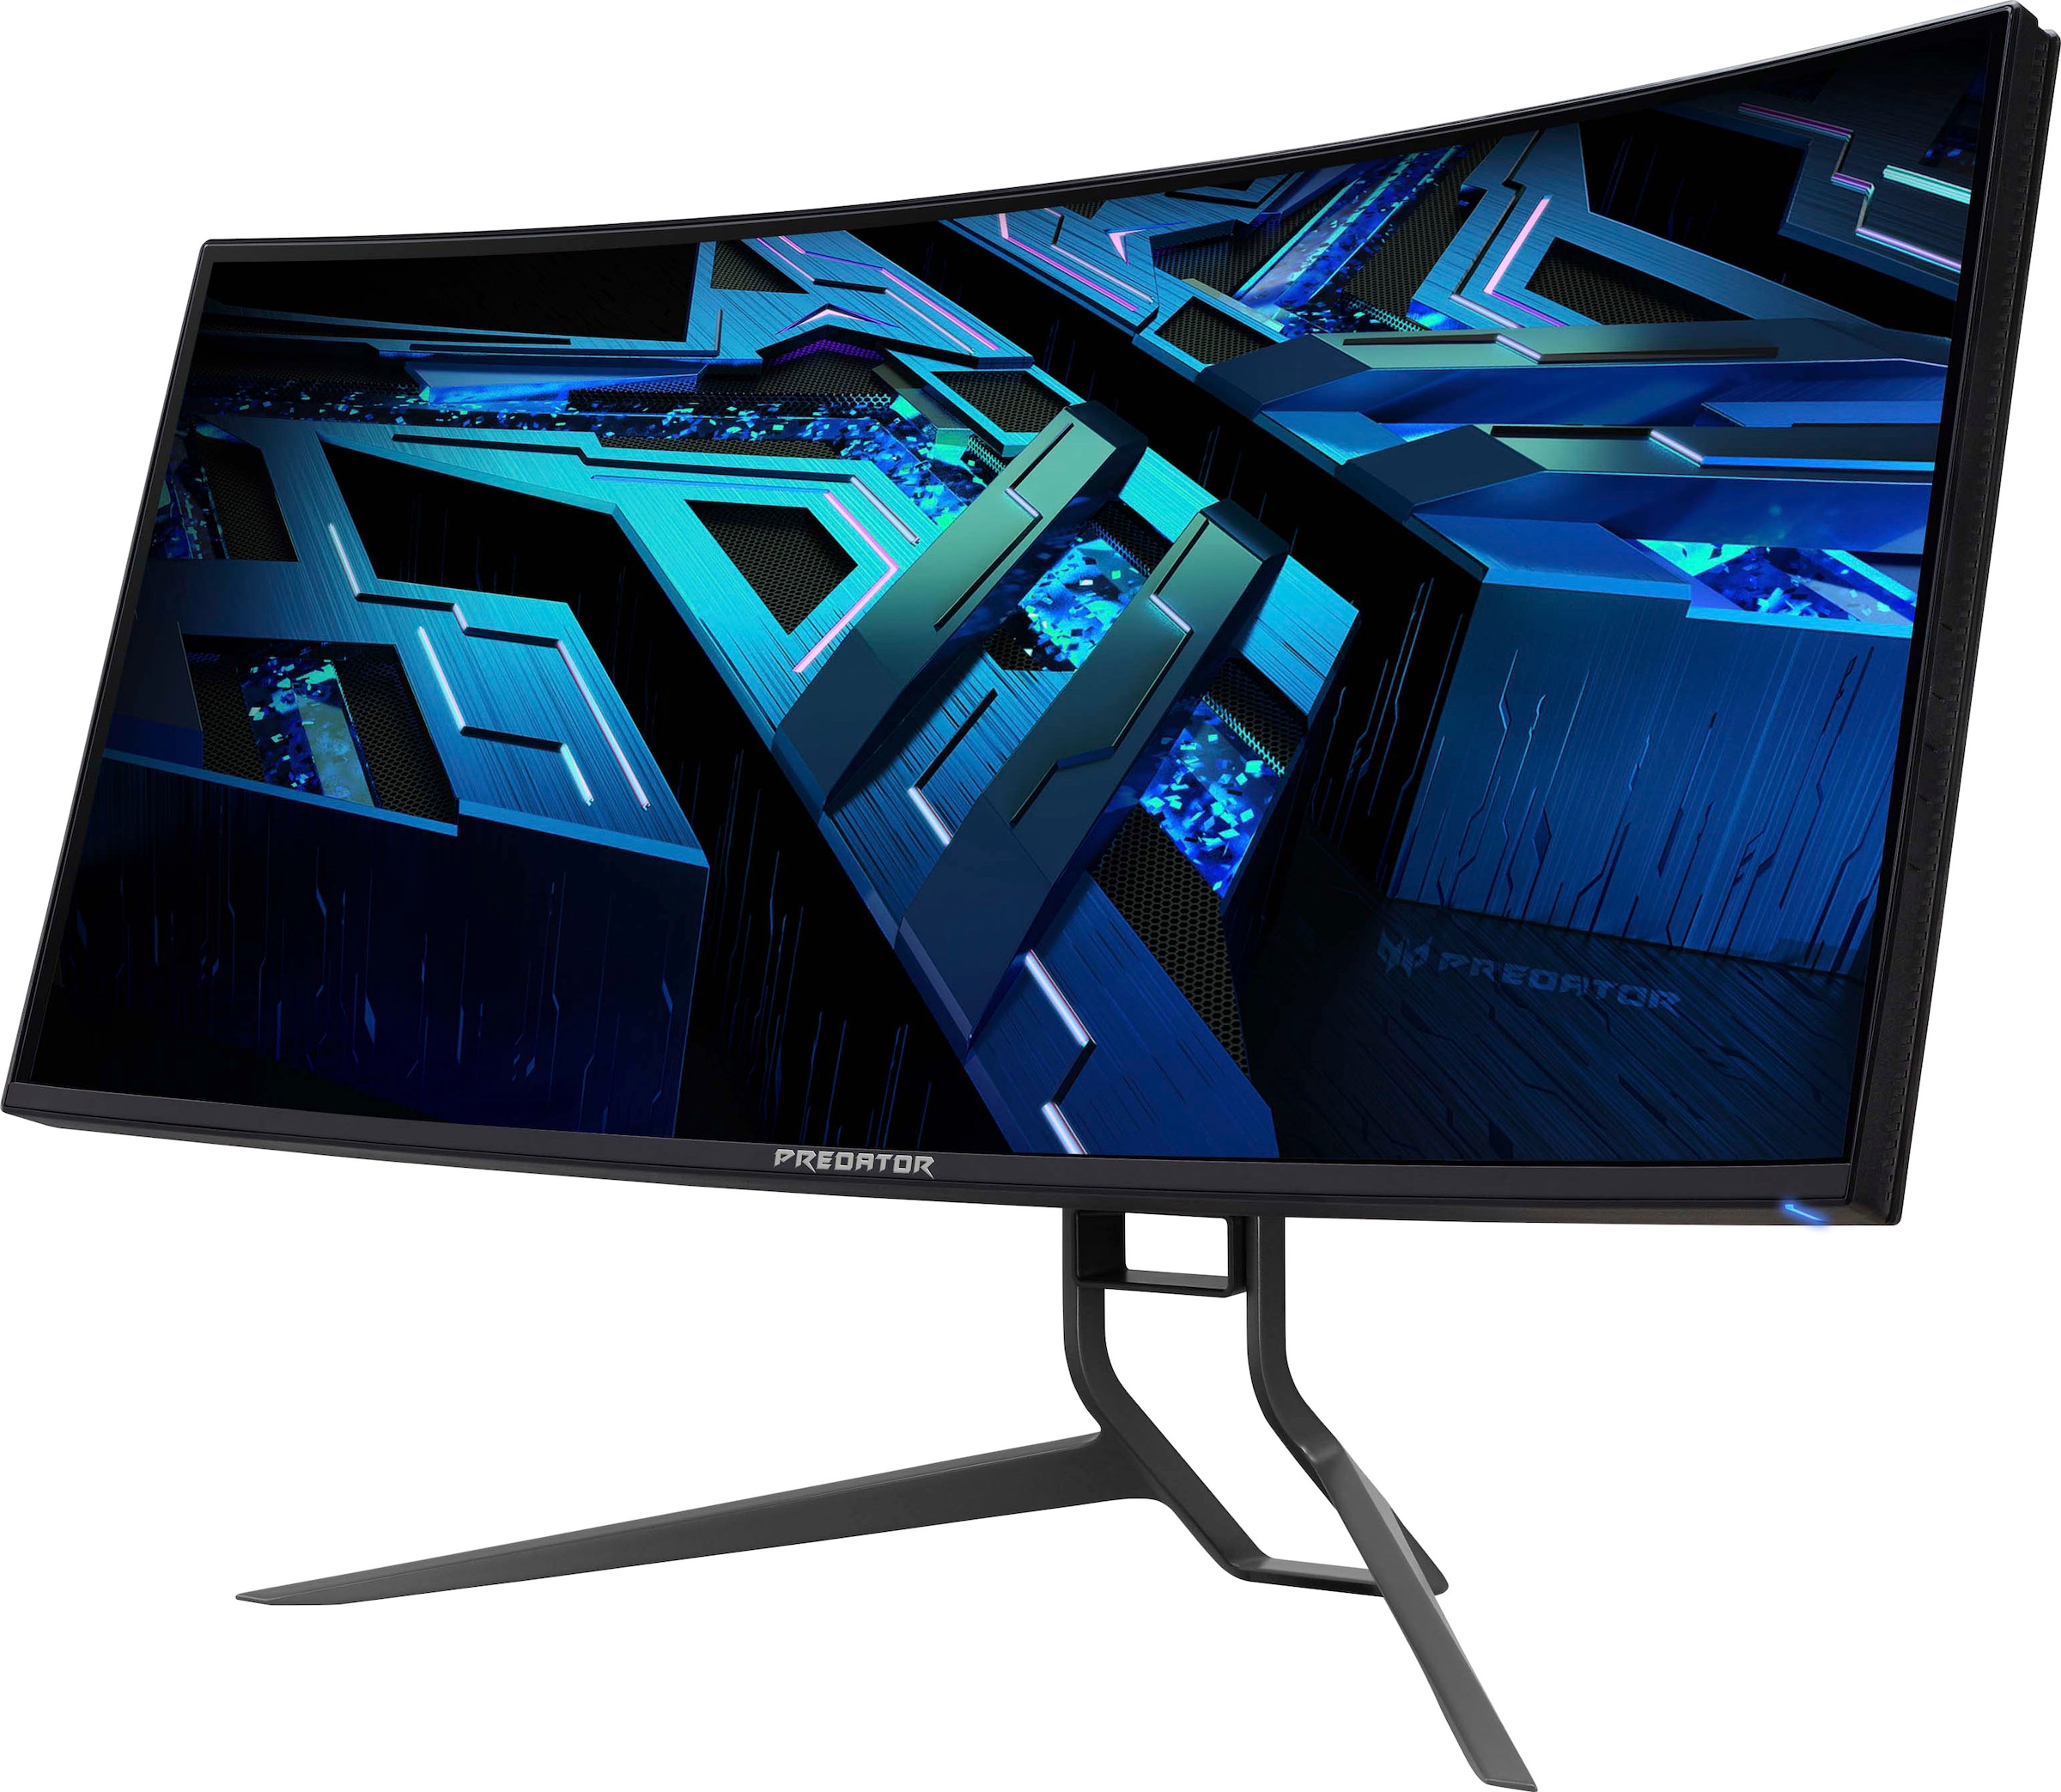 Acer Curved-Gaming-LED-Monitor »Predator X34GS«, x Hz cm/34 0,5 1440 180 Zoll, Reaktionszeit, | BAUR ms 3440 px, 86,4